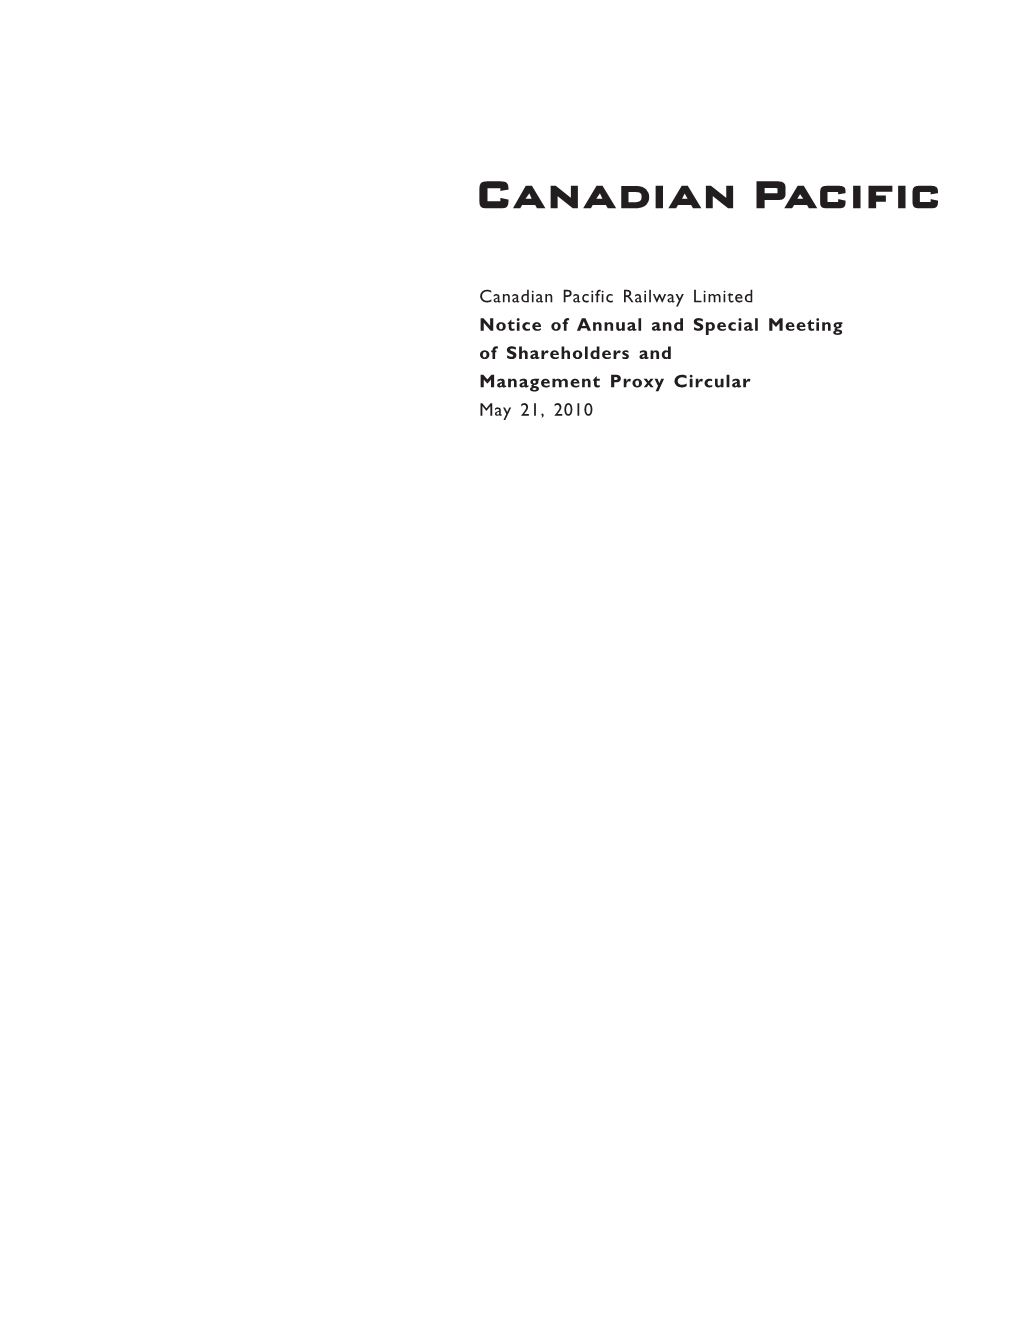 Canadian Pacific Railway Limited Notice of Annual and Special Meeting of Shareholders and Management Proxy Circular May 21, 2010 March 24, 2010